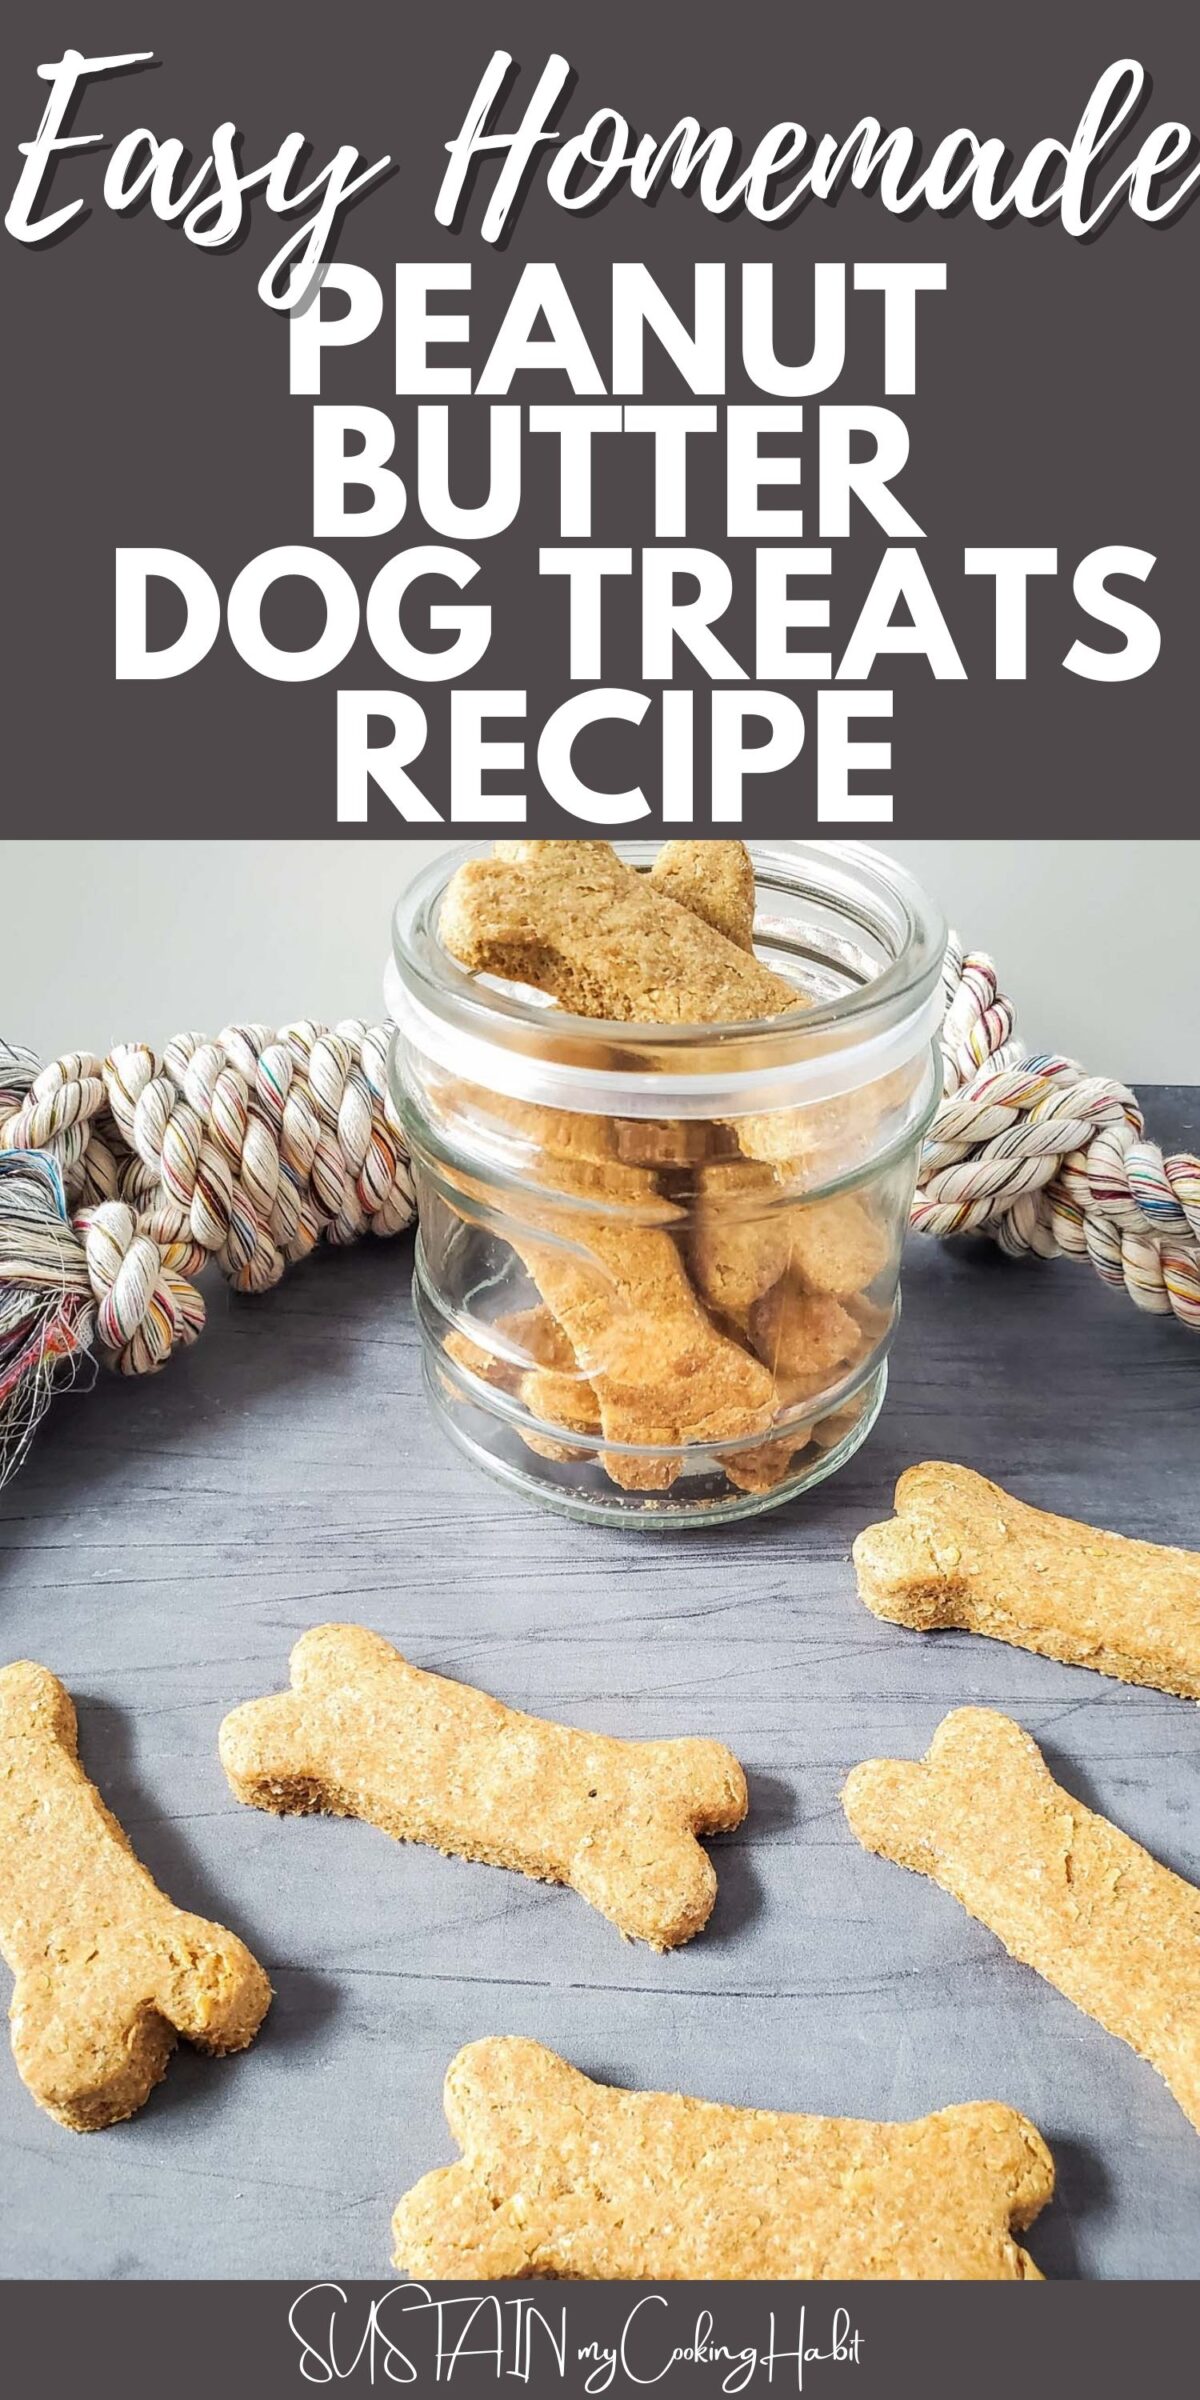 Peanut butter dog treats with text overlay.